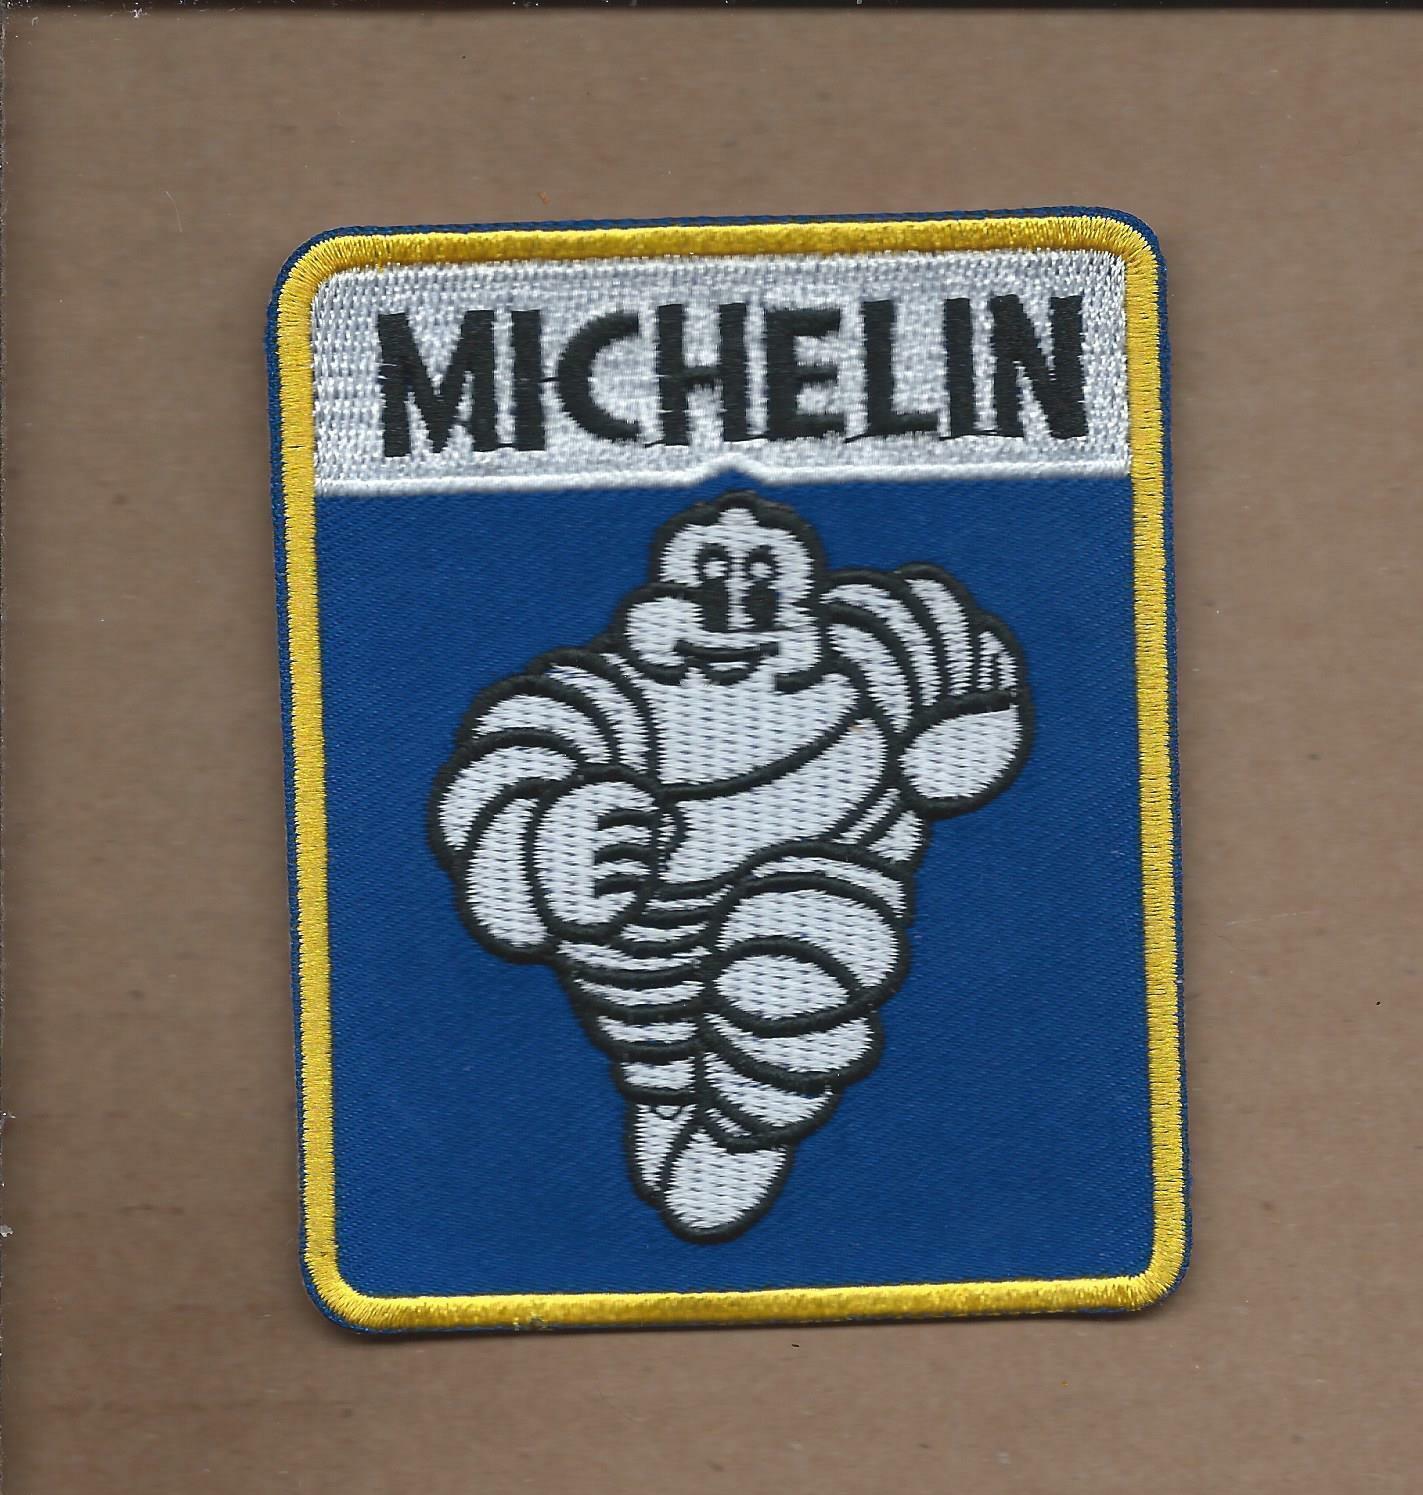 NEW 3 X 3 3/4 INCH MICHELIN TIRES IRON ON PATCH 